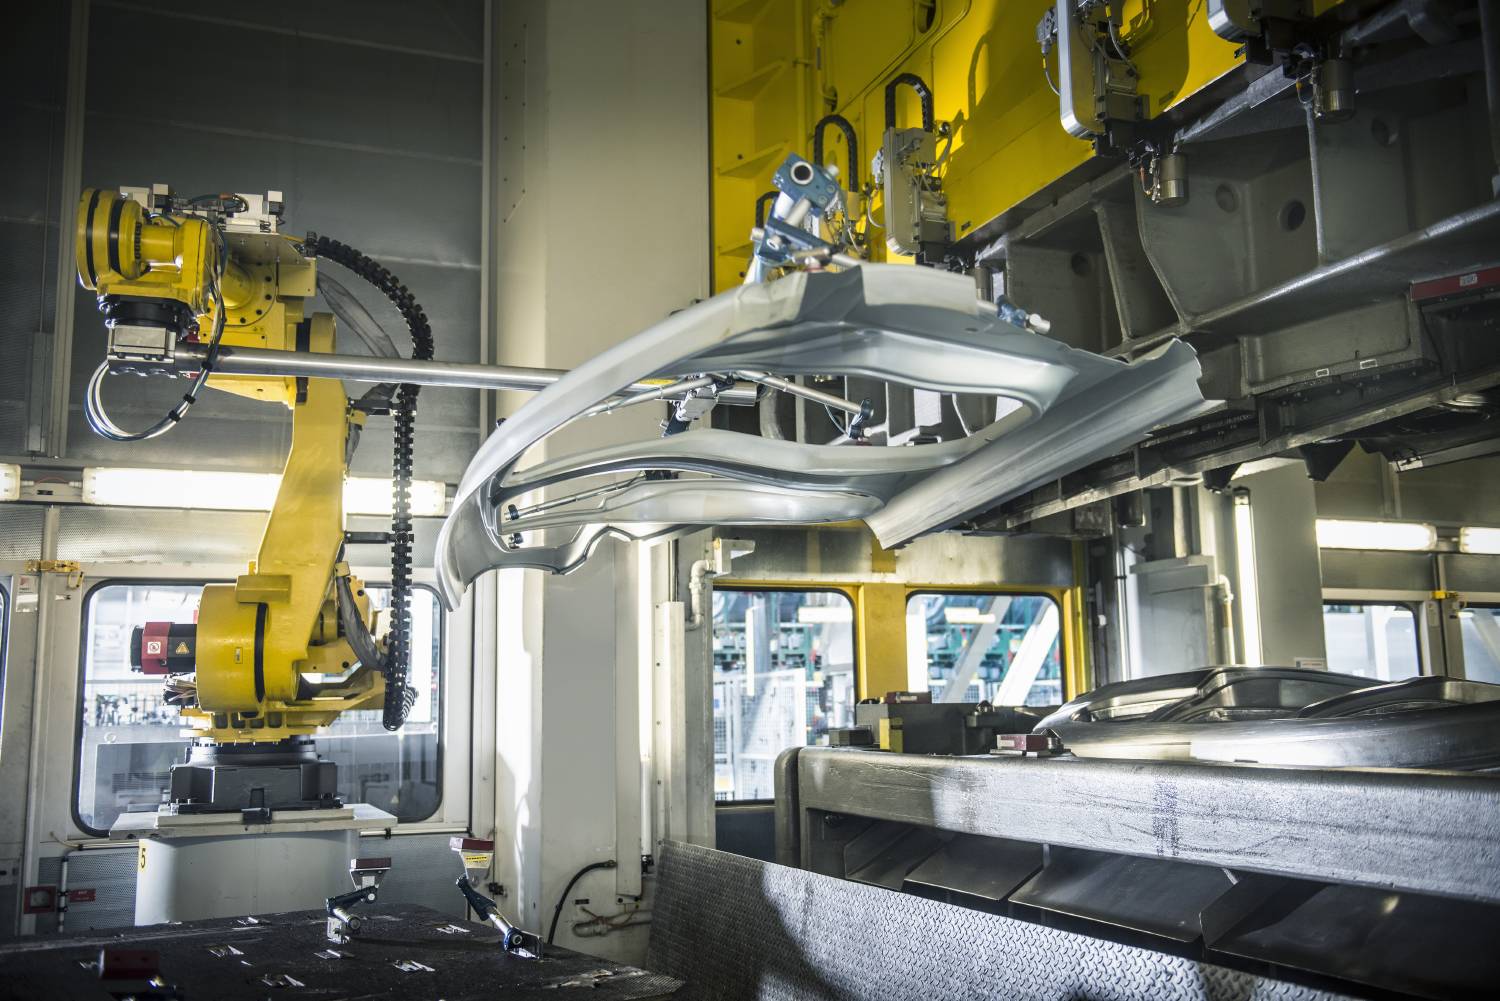 Smart factory machines work best when provided with good data quality